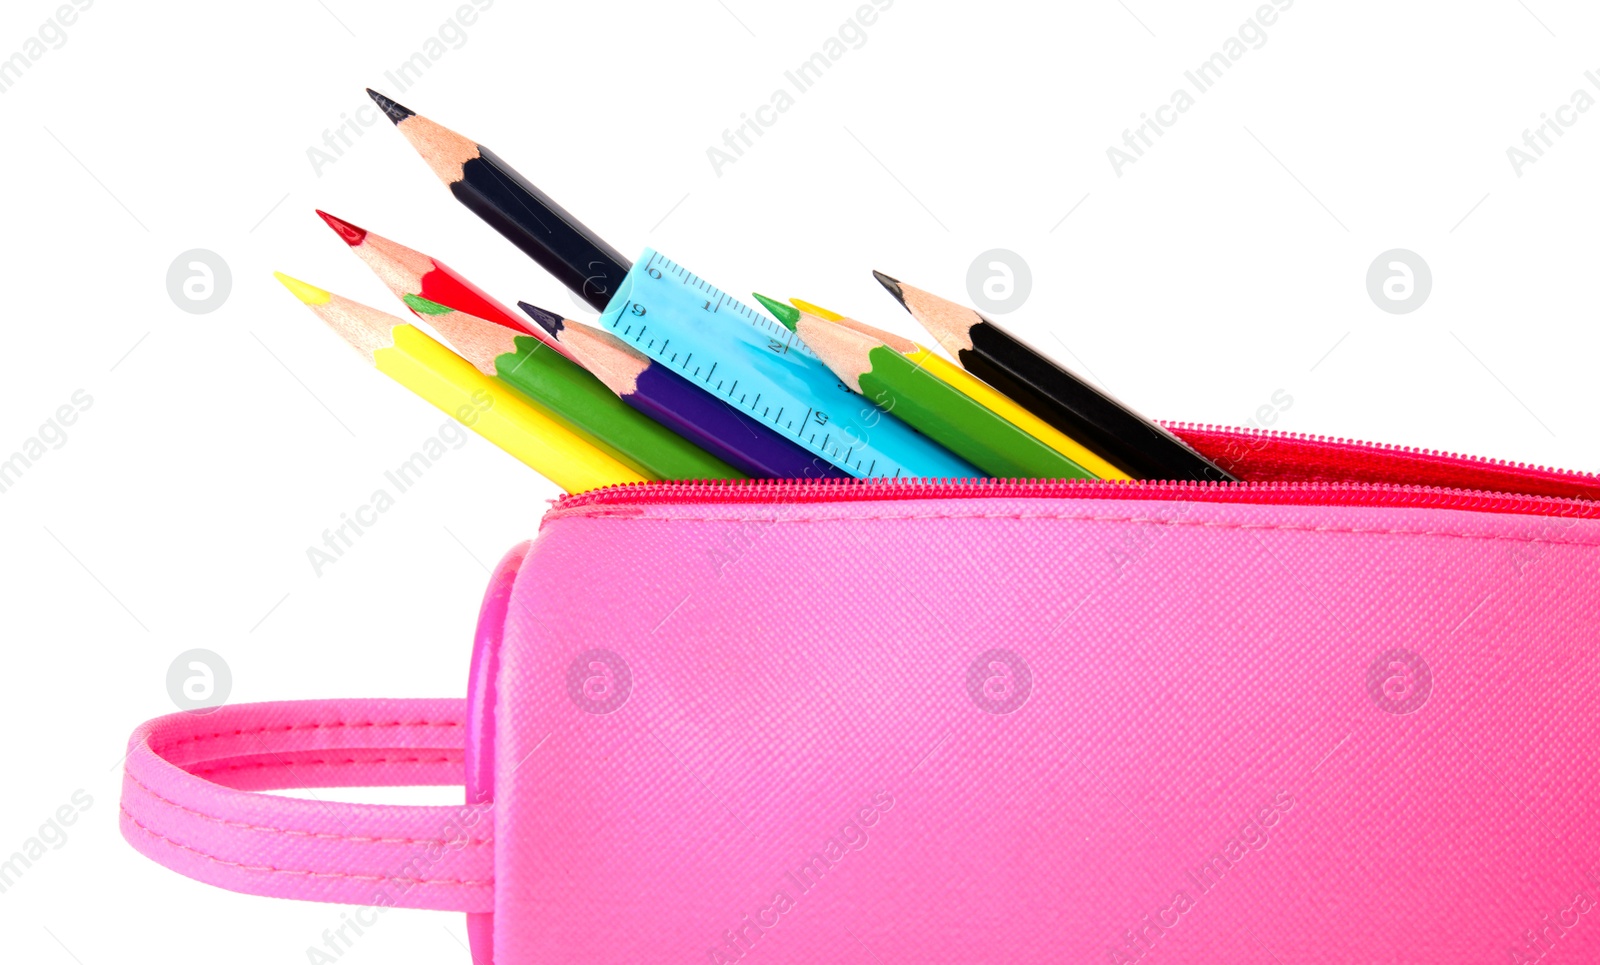 Photo of Case full of color pencils on white background